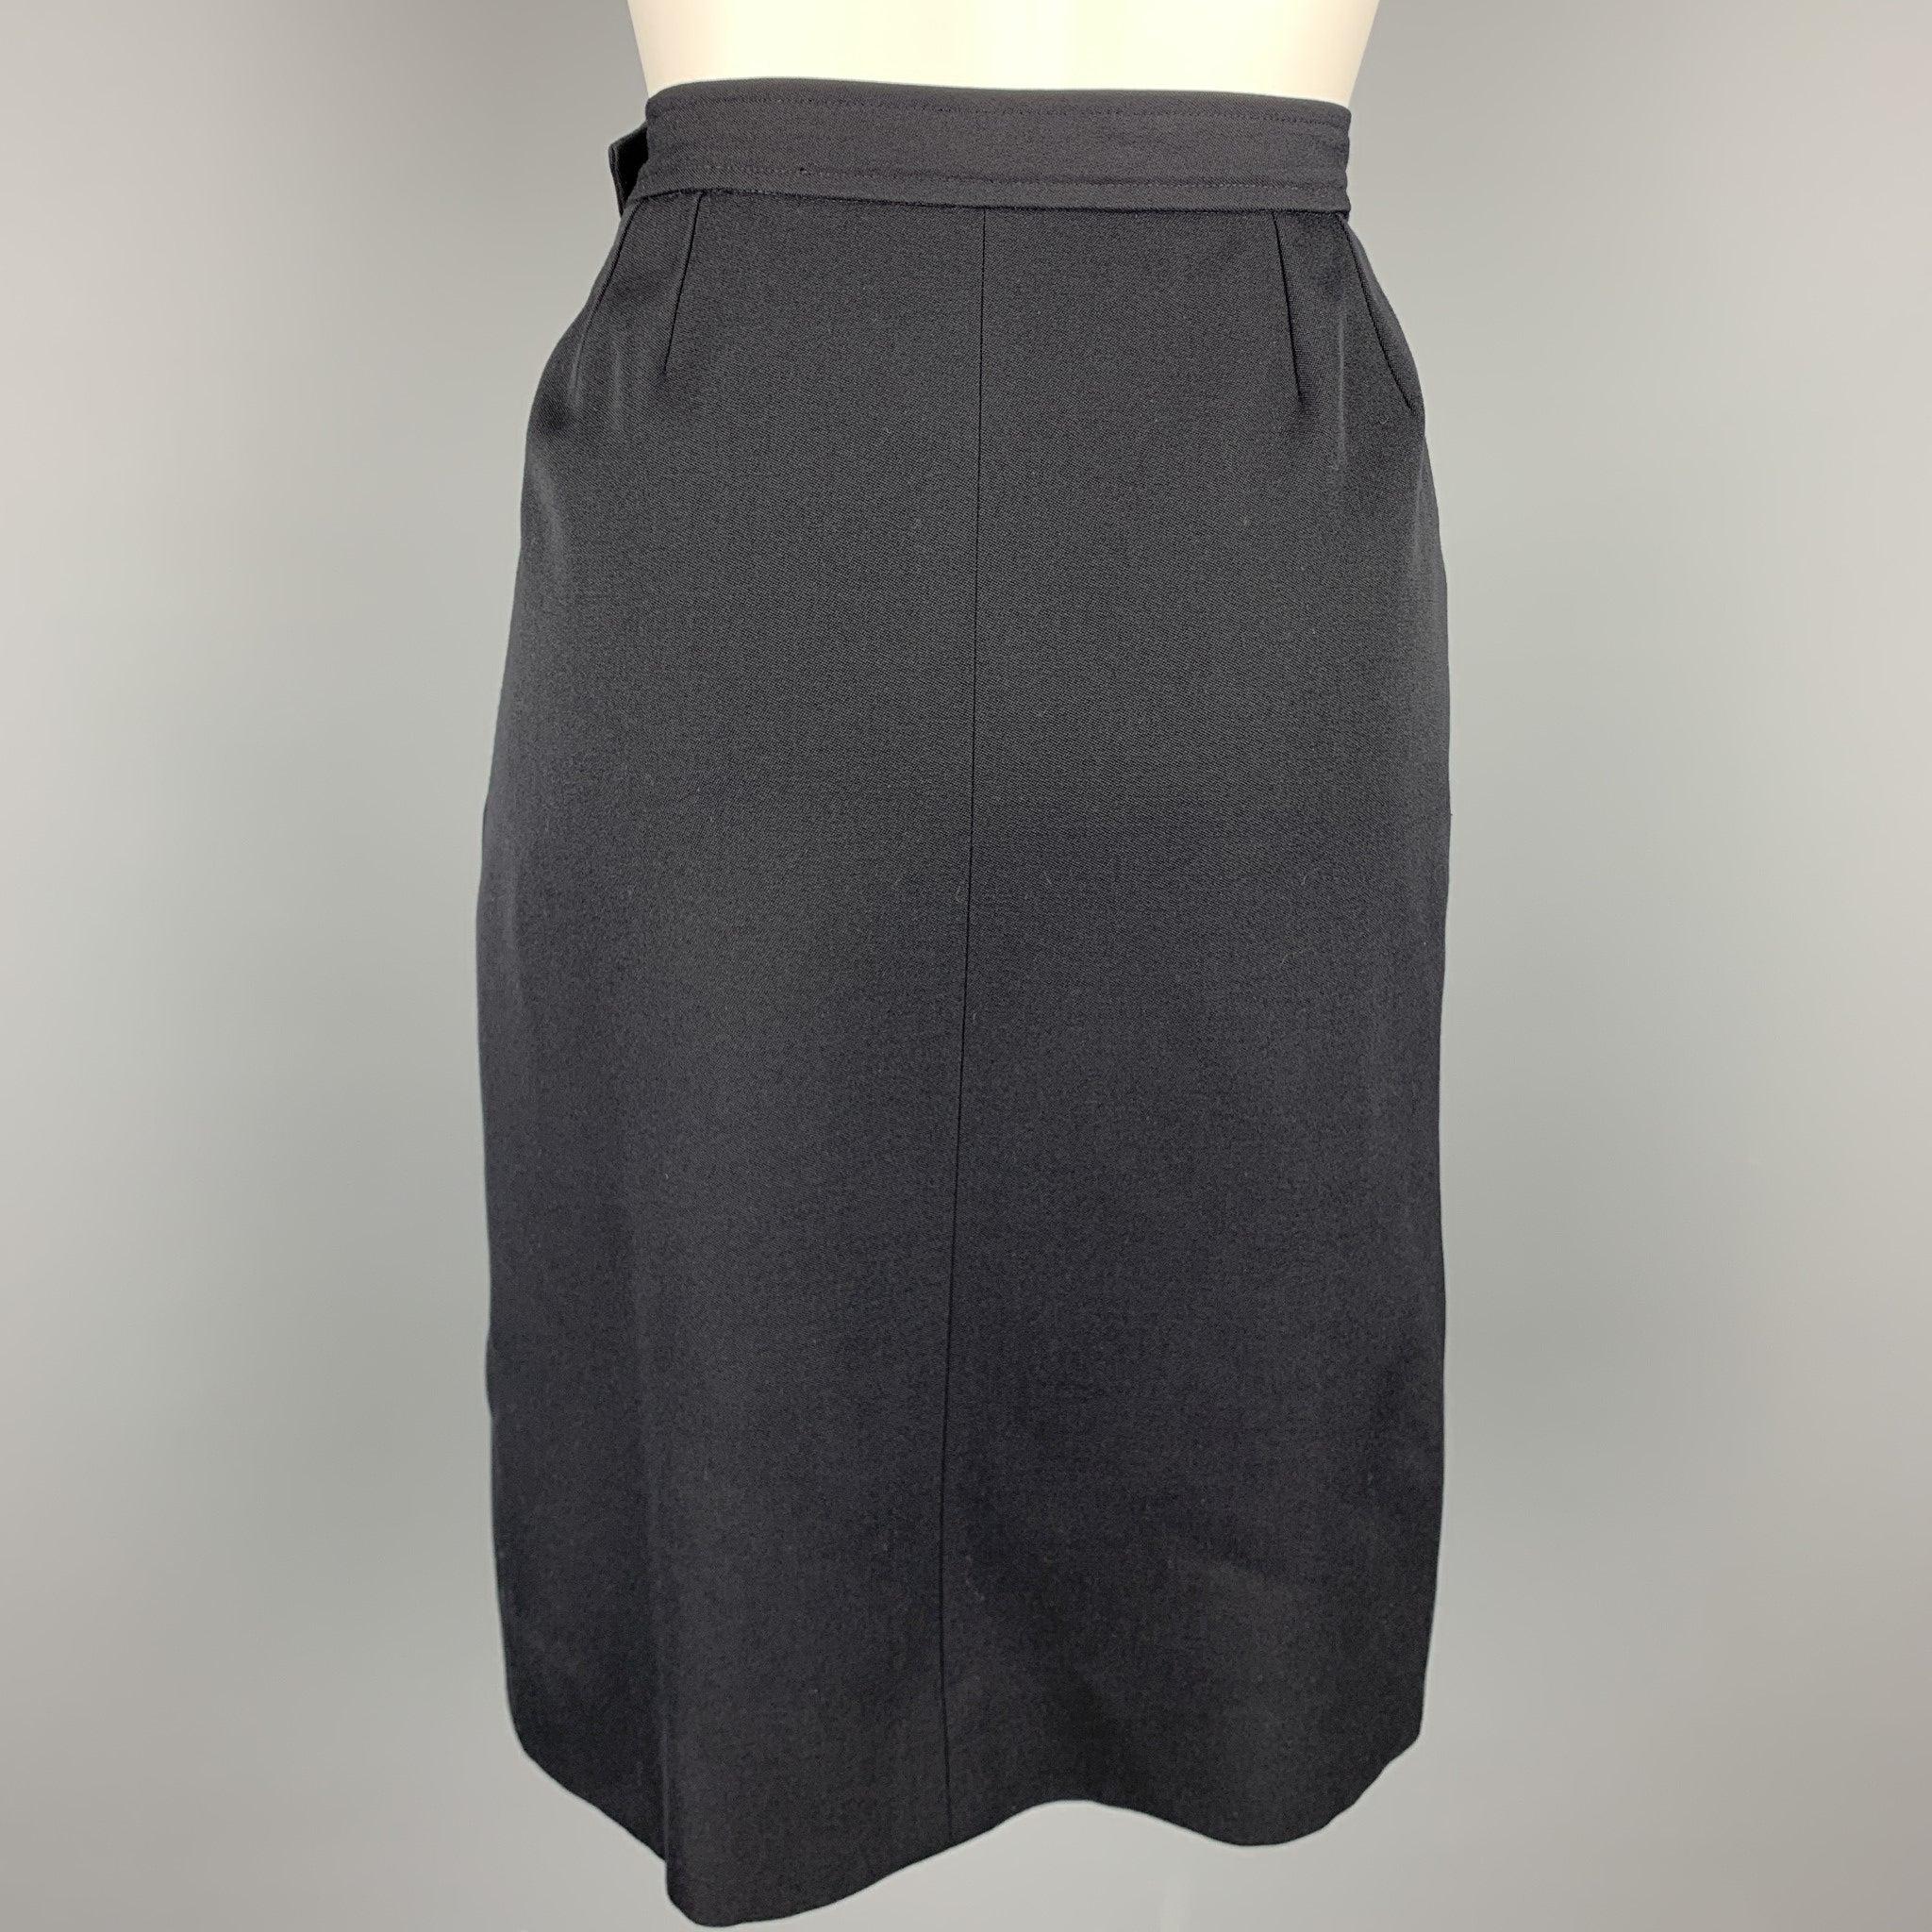 Vintage YVES SAINT LAURENT Rive Gauche Size 6 Navy Wool Pencil Skirt In Good Condition For Sale In San Francisco, CA